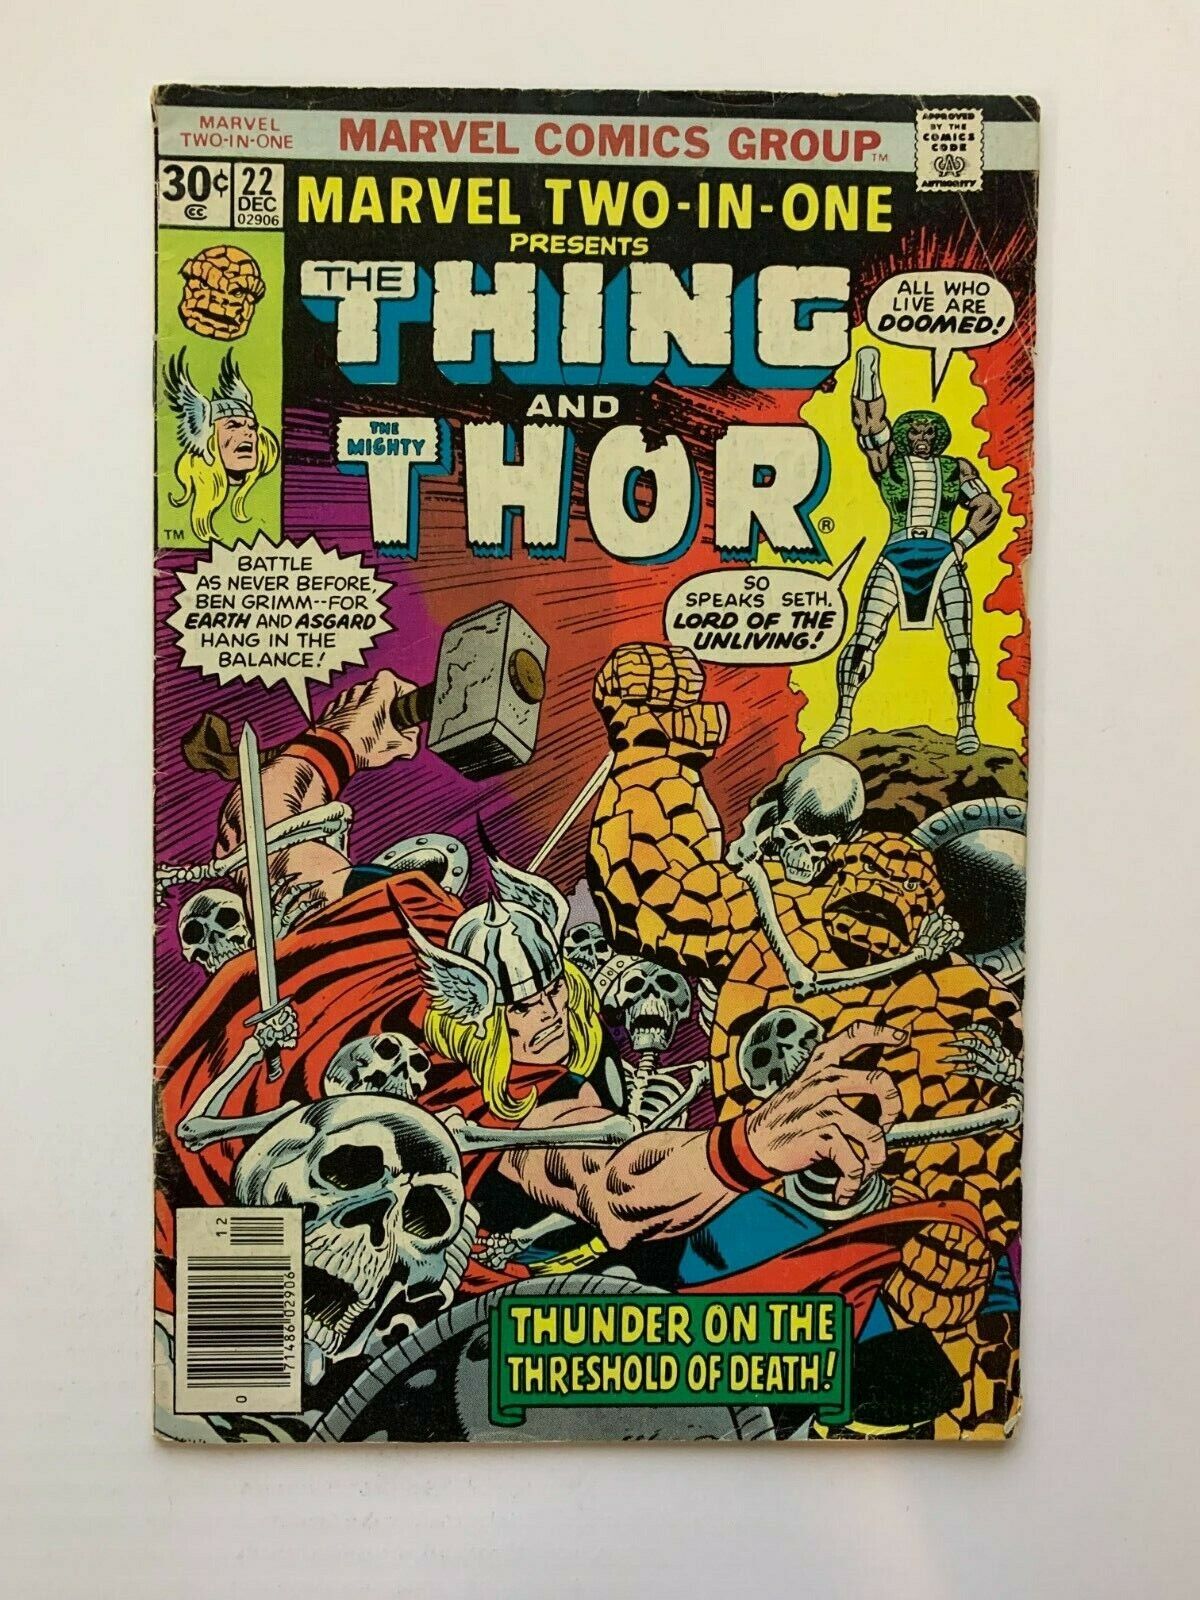 Marvel Two-in-One #22 - Dec 1976 - Vol.1          (3073)